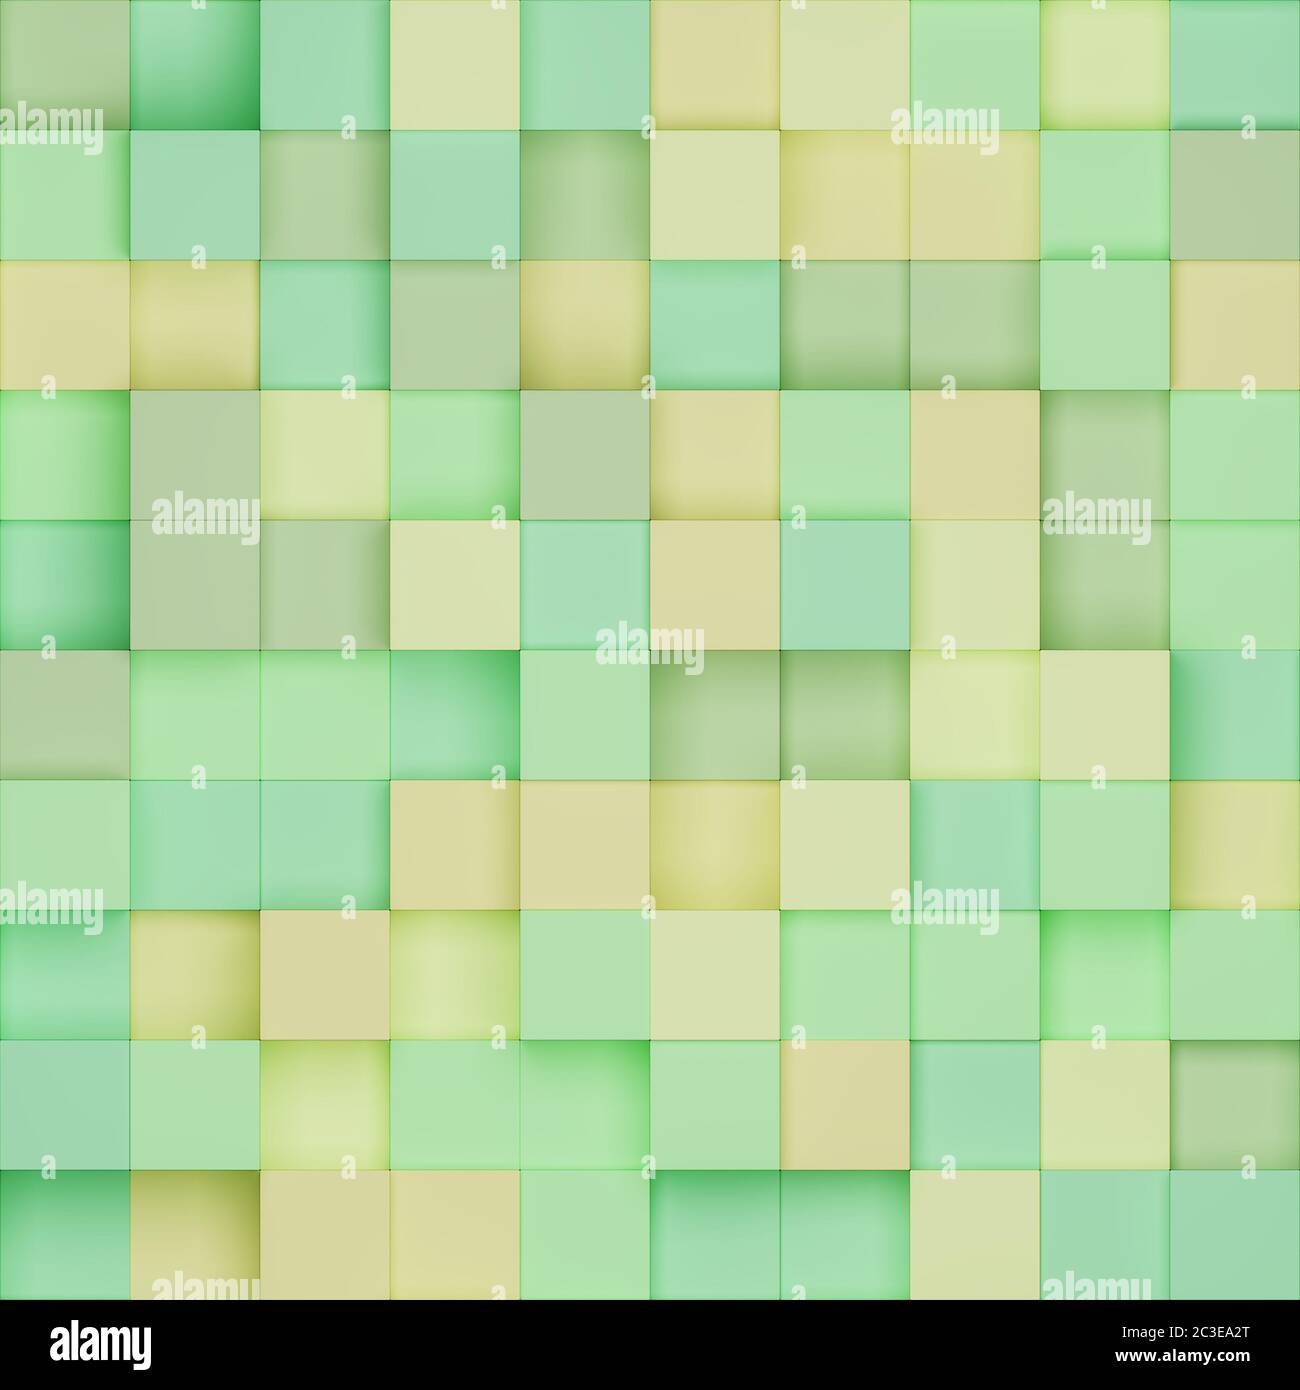 Seamless tile of colored isometric boxes with shadows in a green yellow pastel style color scheme Stock Photo